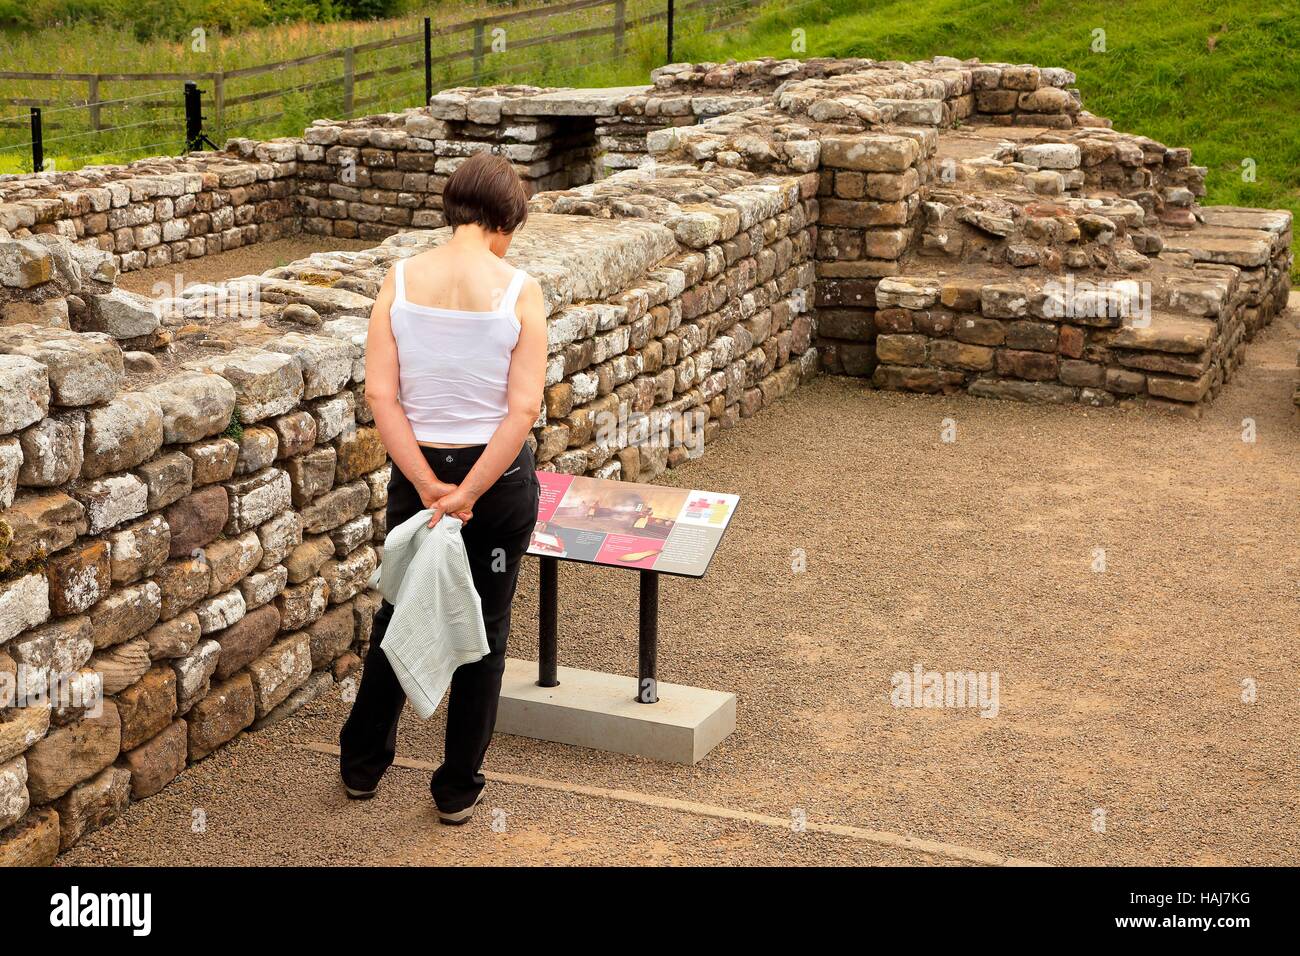 Woman reading information sign. Chesters Roman Fort and Museum bathhouse. Chollerford, Hexham, Northumberland, England, United Kingdom, Europe. Stock Photo